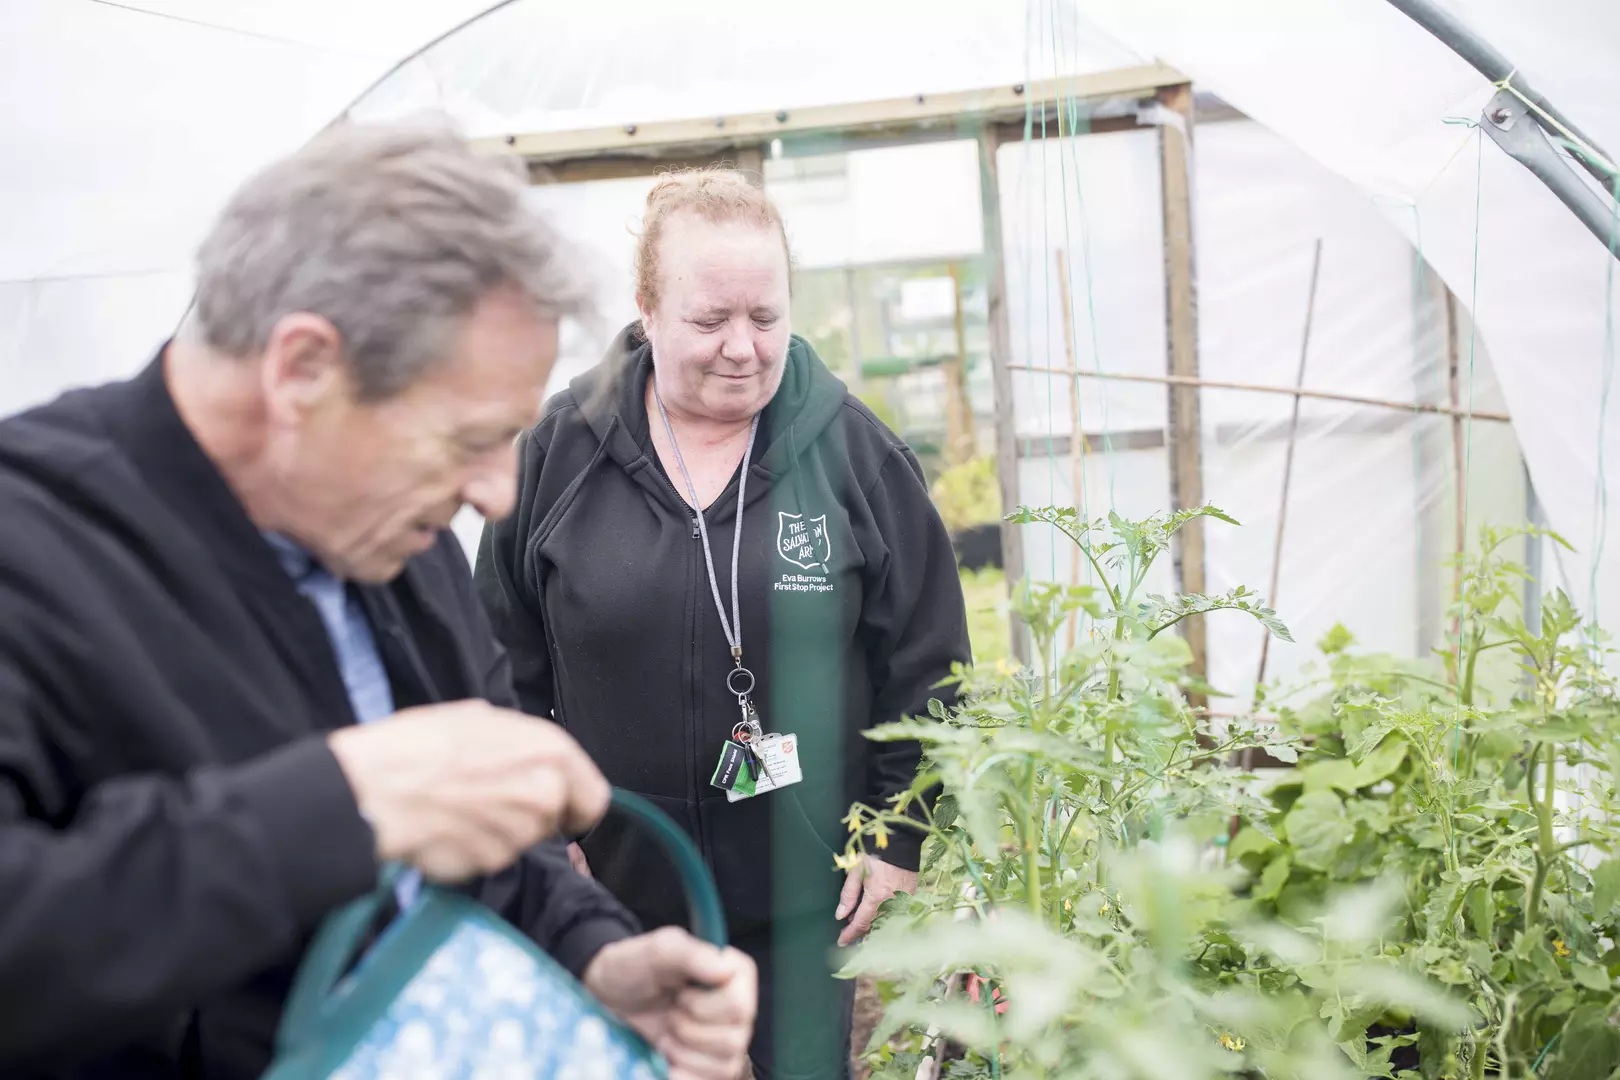 A middle aged man and a woman are watering plants in a polytunnel with a watering can.